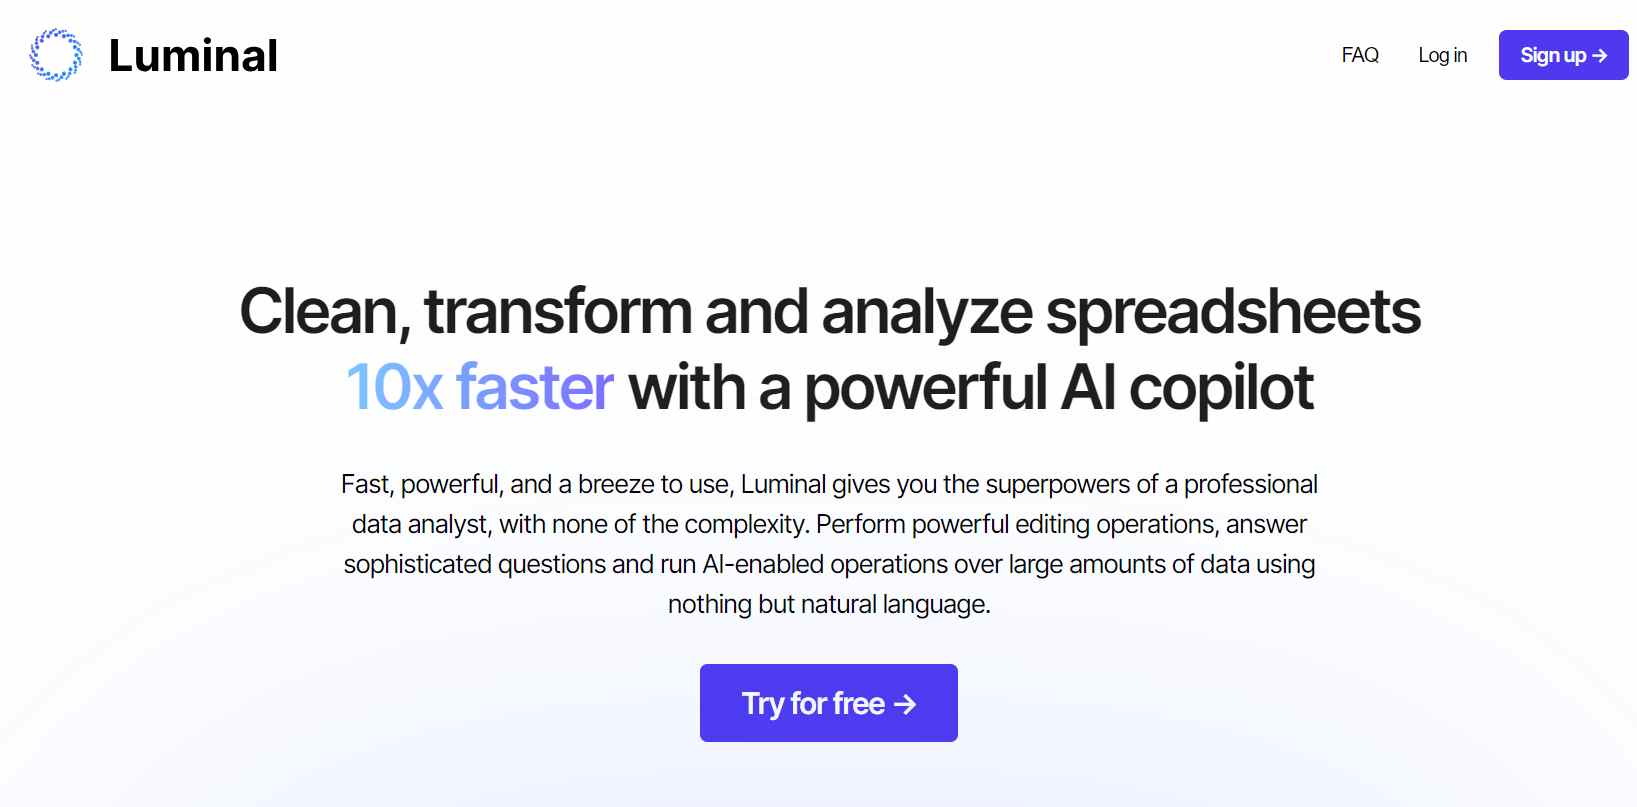 Luminal-cloud-based-data-management-tool-with-integrated-transformation-and-visualization-features